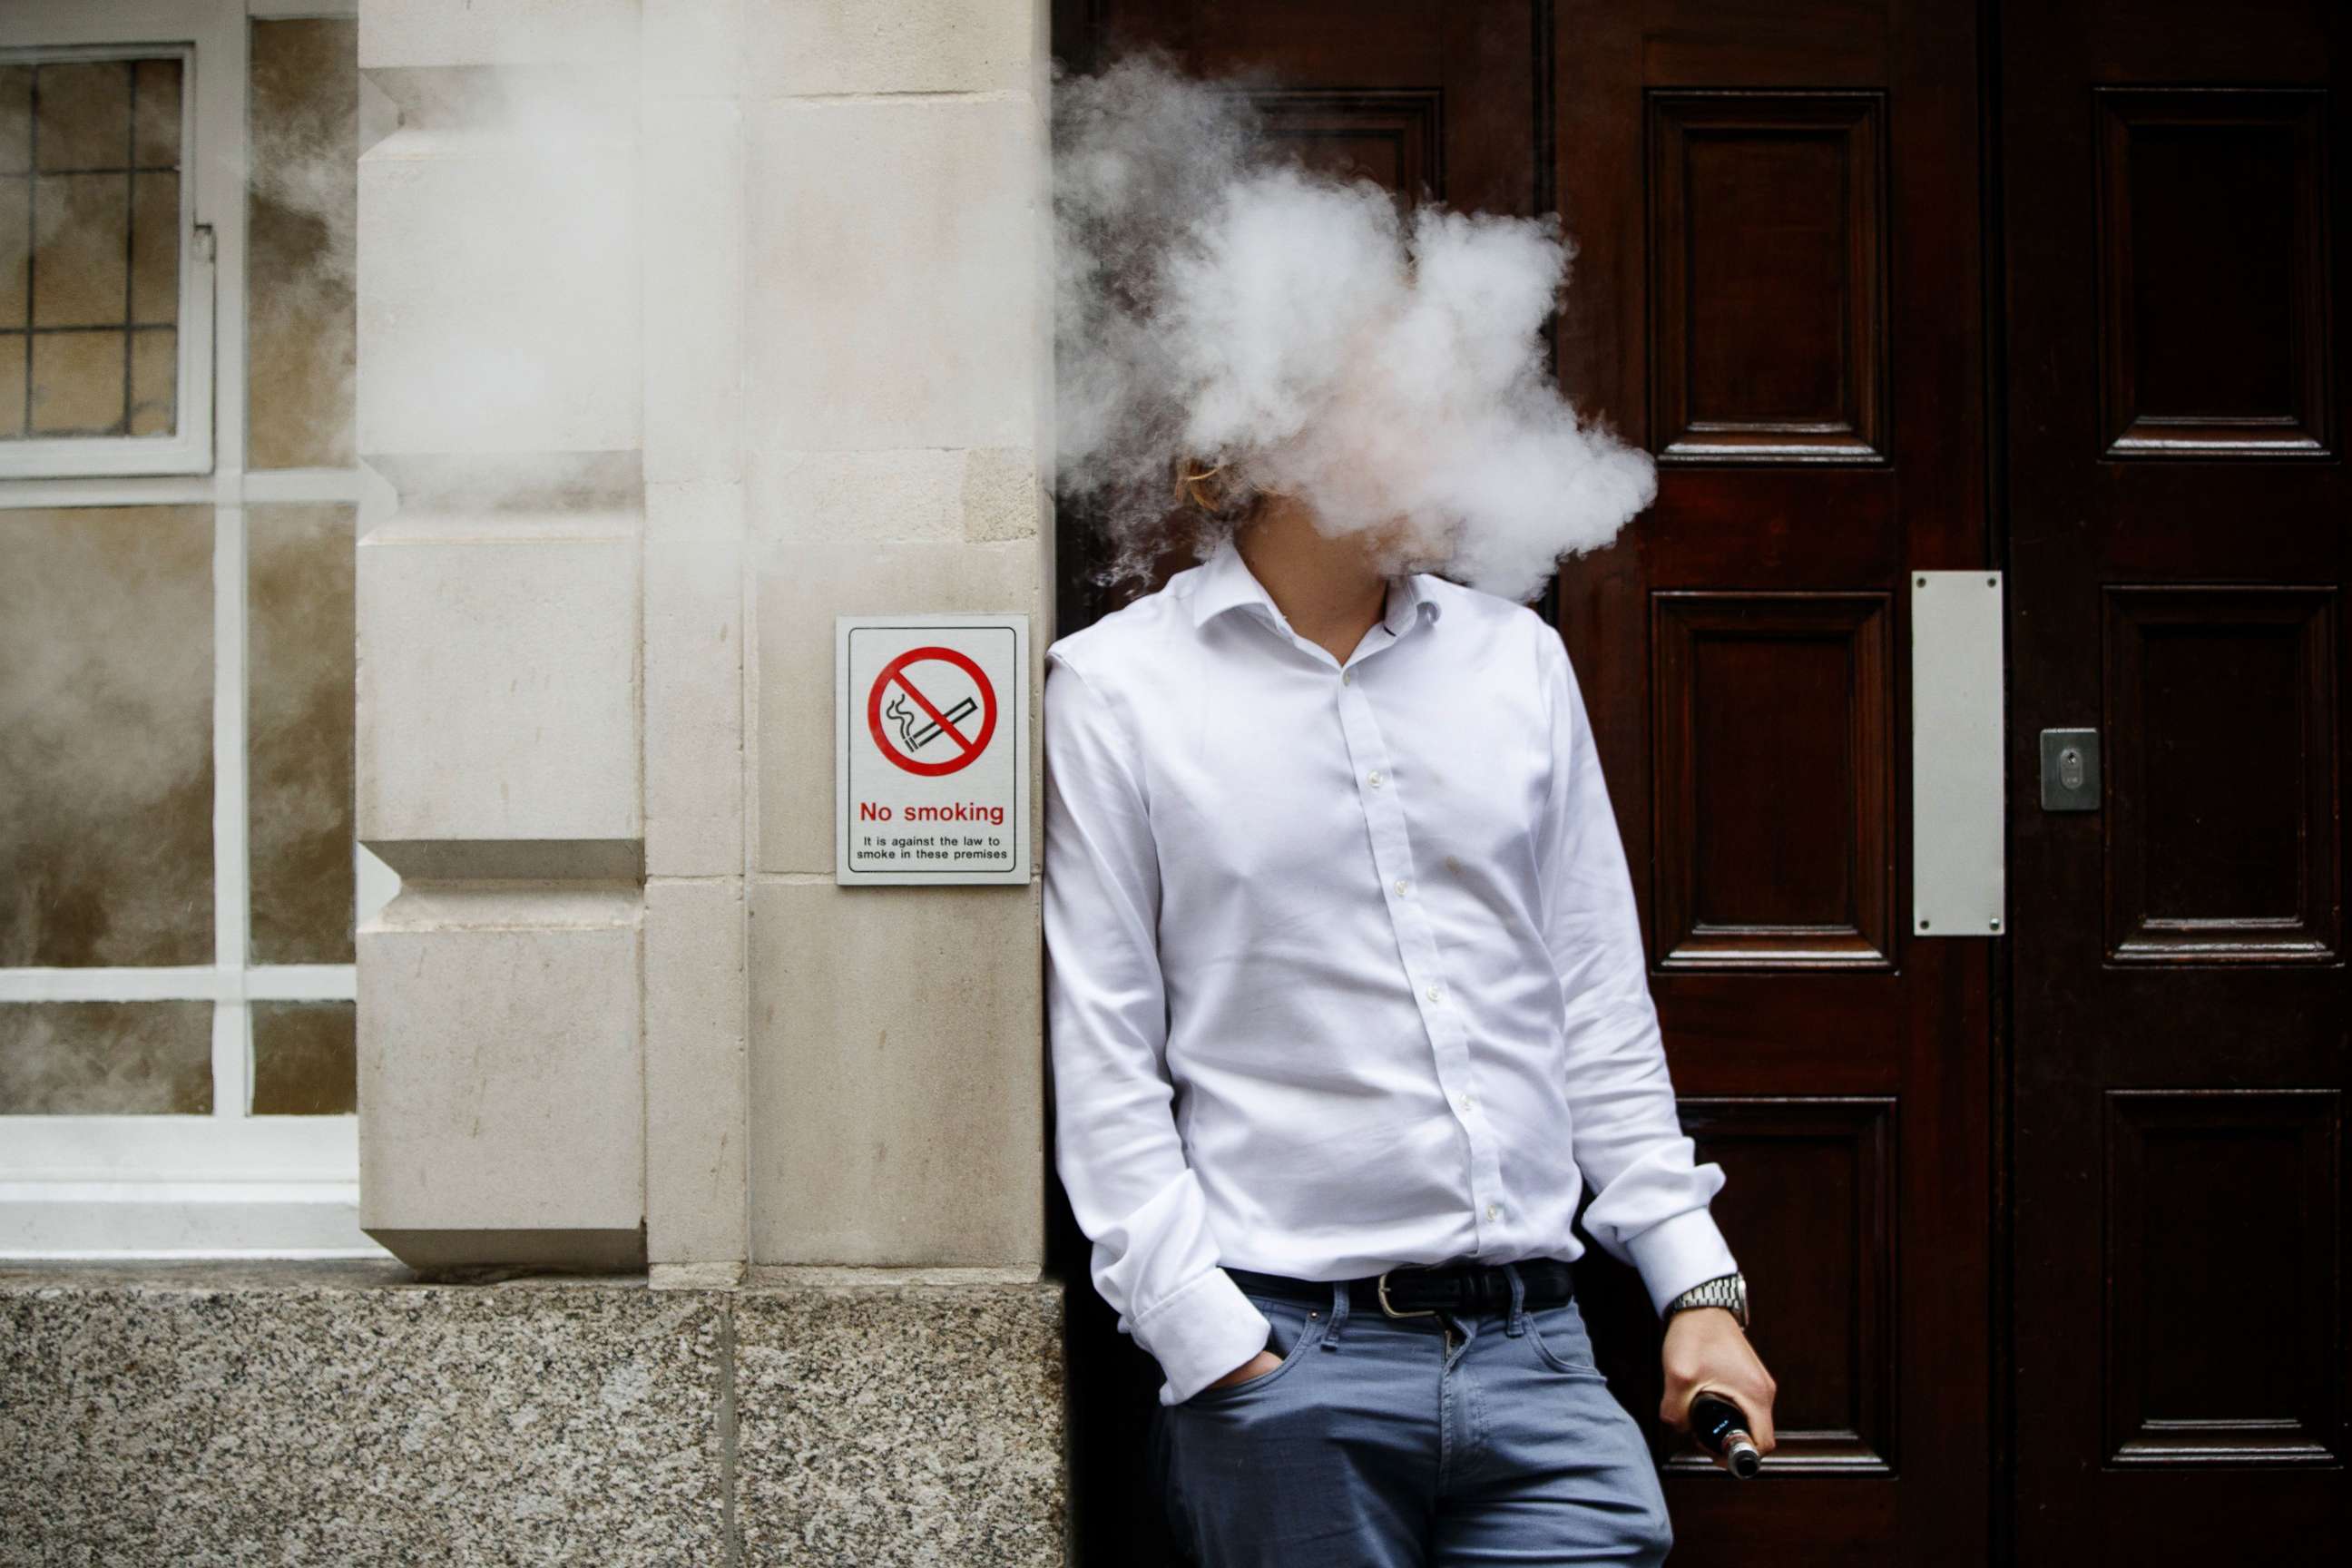 PHOTO: A smoker is engulfed by vapors as he smokes an e-cigarette during lunch time in central London, Aug. 9, 2017.